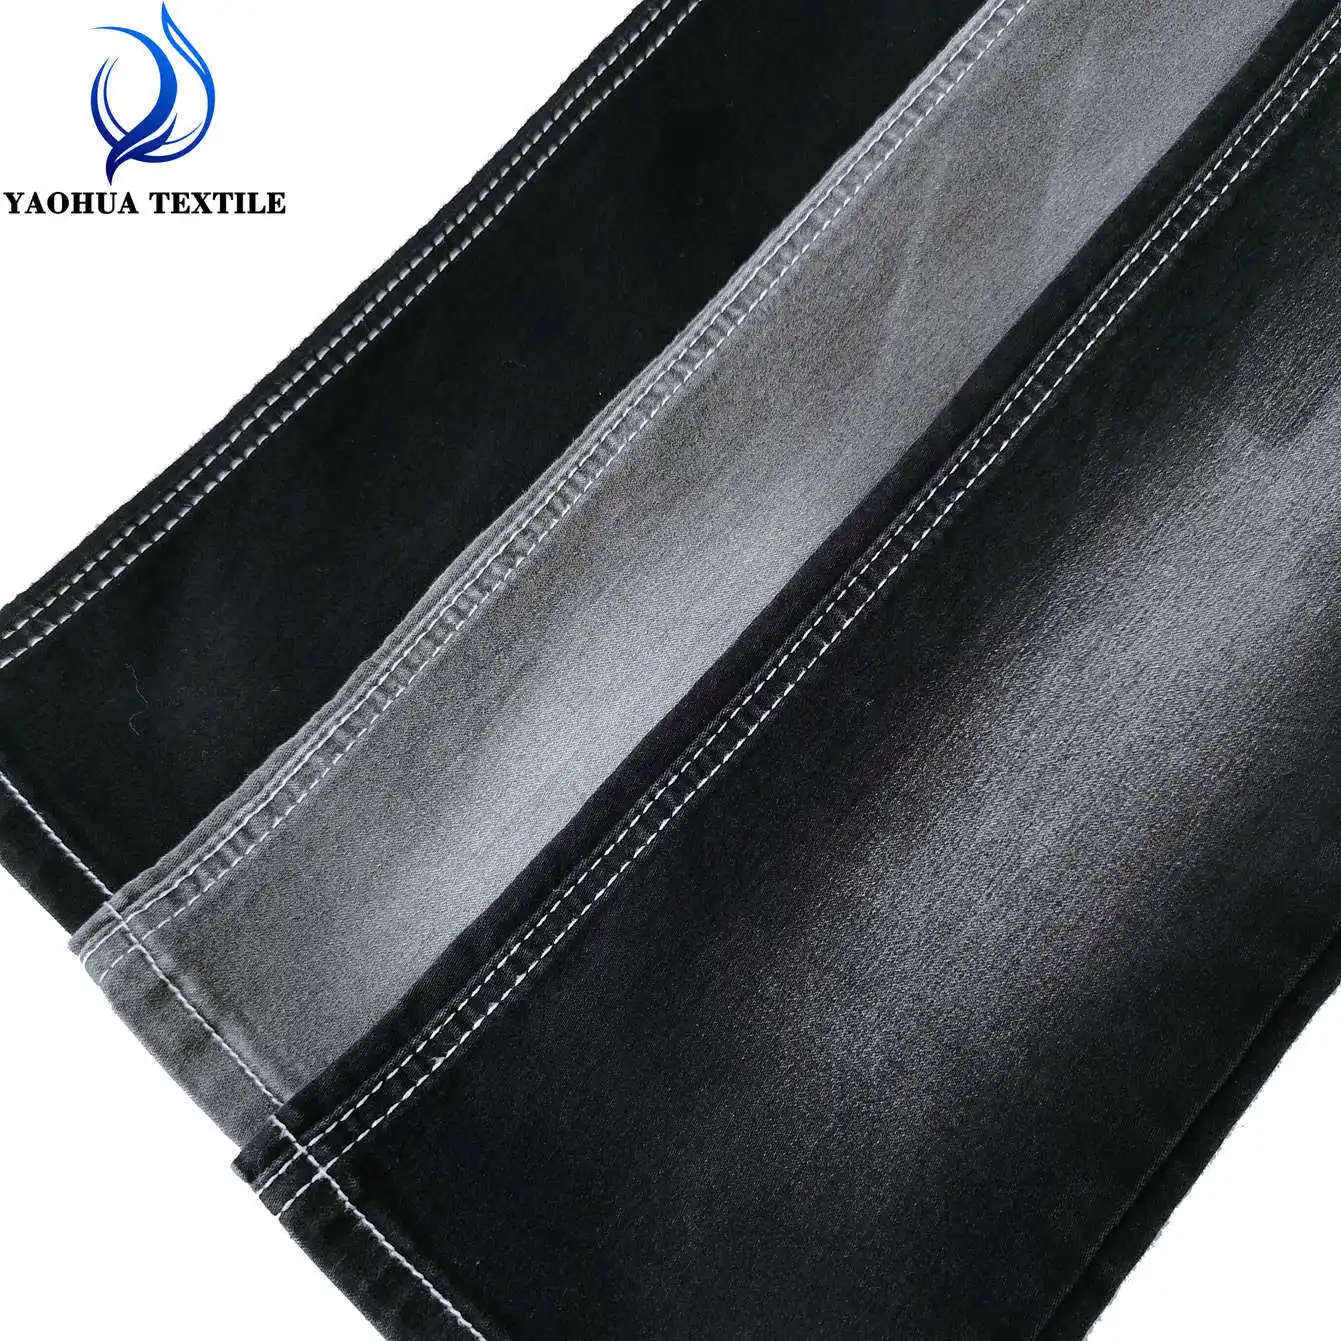 1429-2 Made in China satin cotton polyester spandex stretch denim fabric for jeans